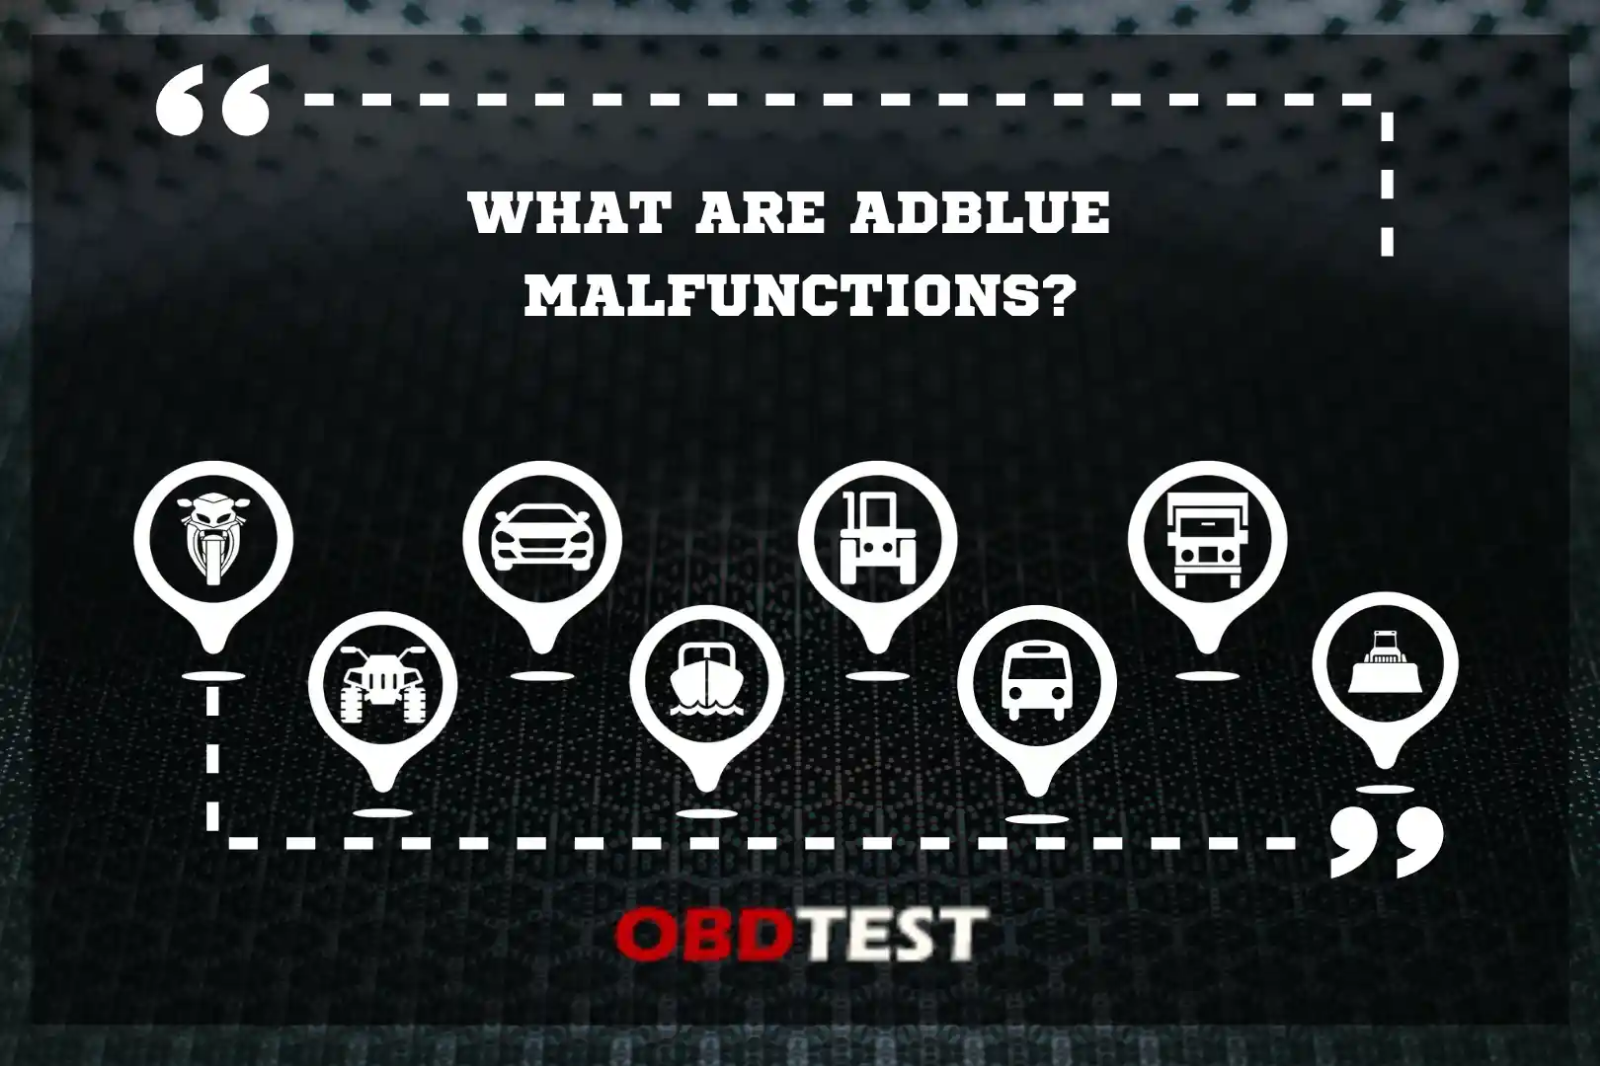 What are Adblue malfunctions?